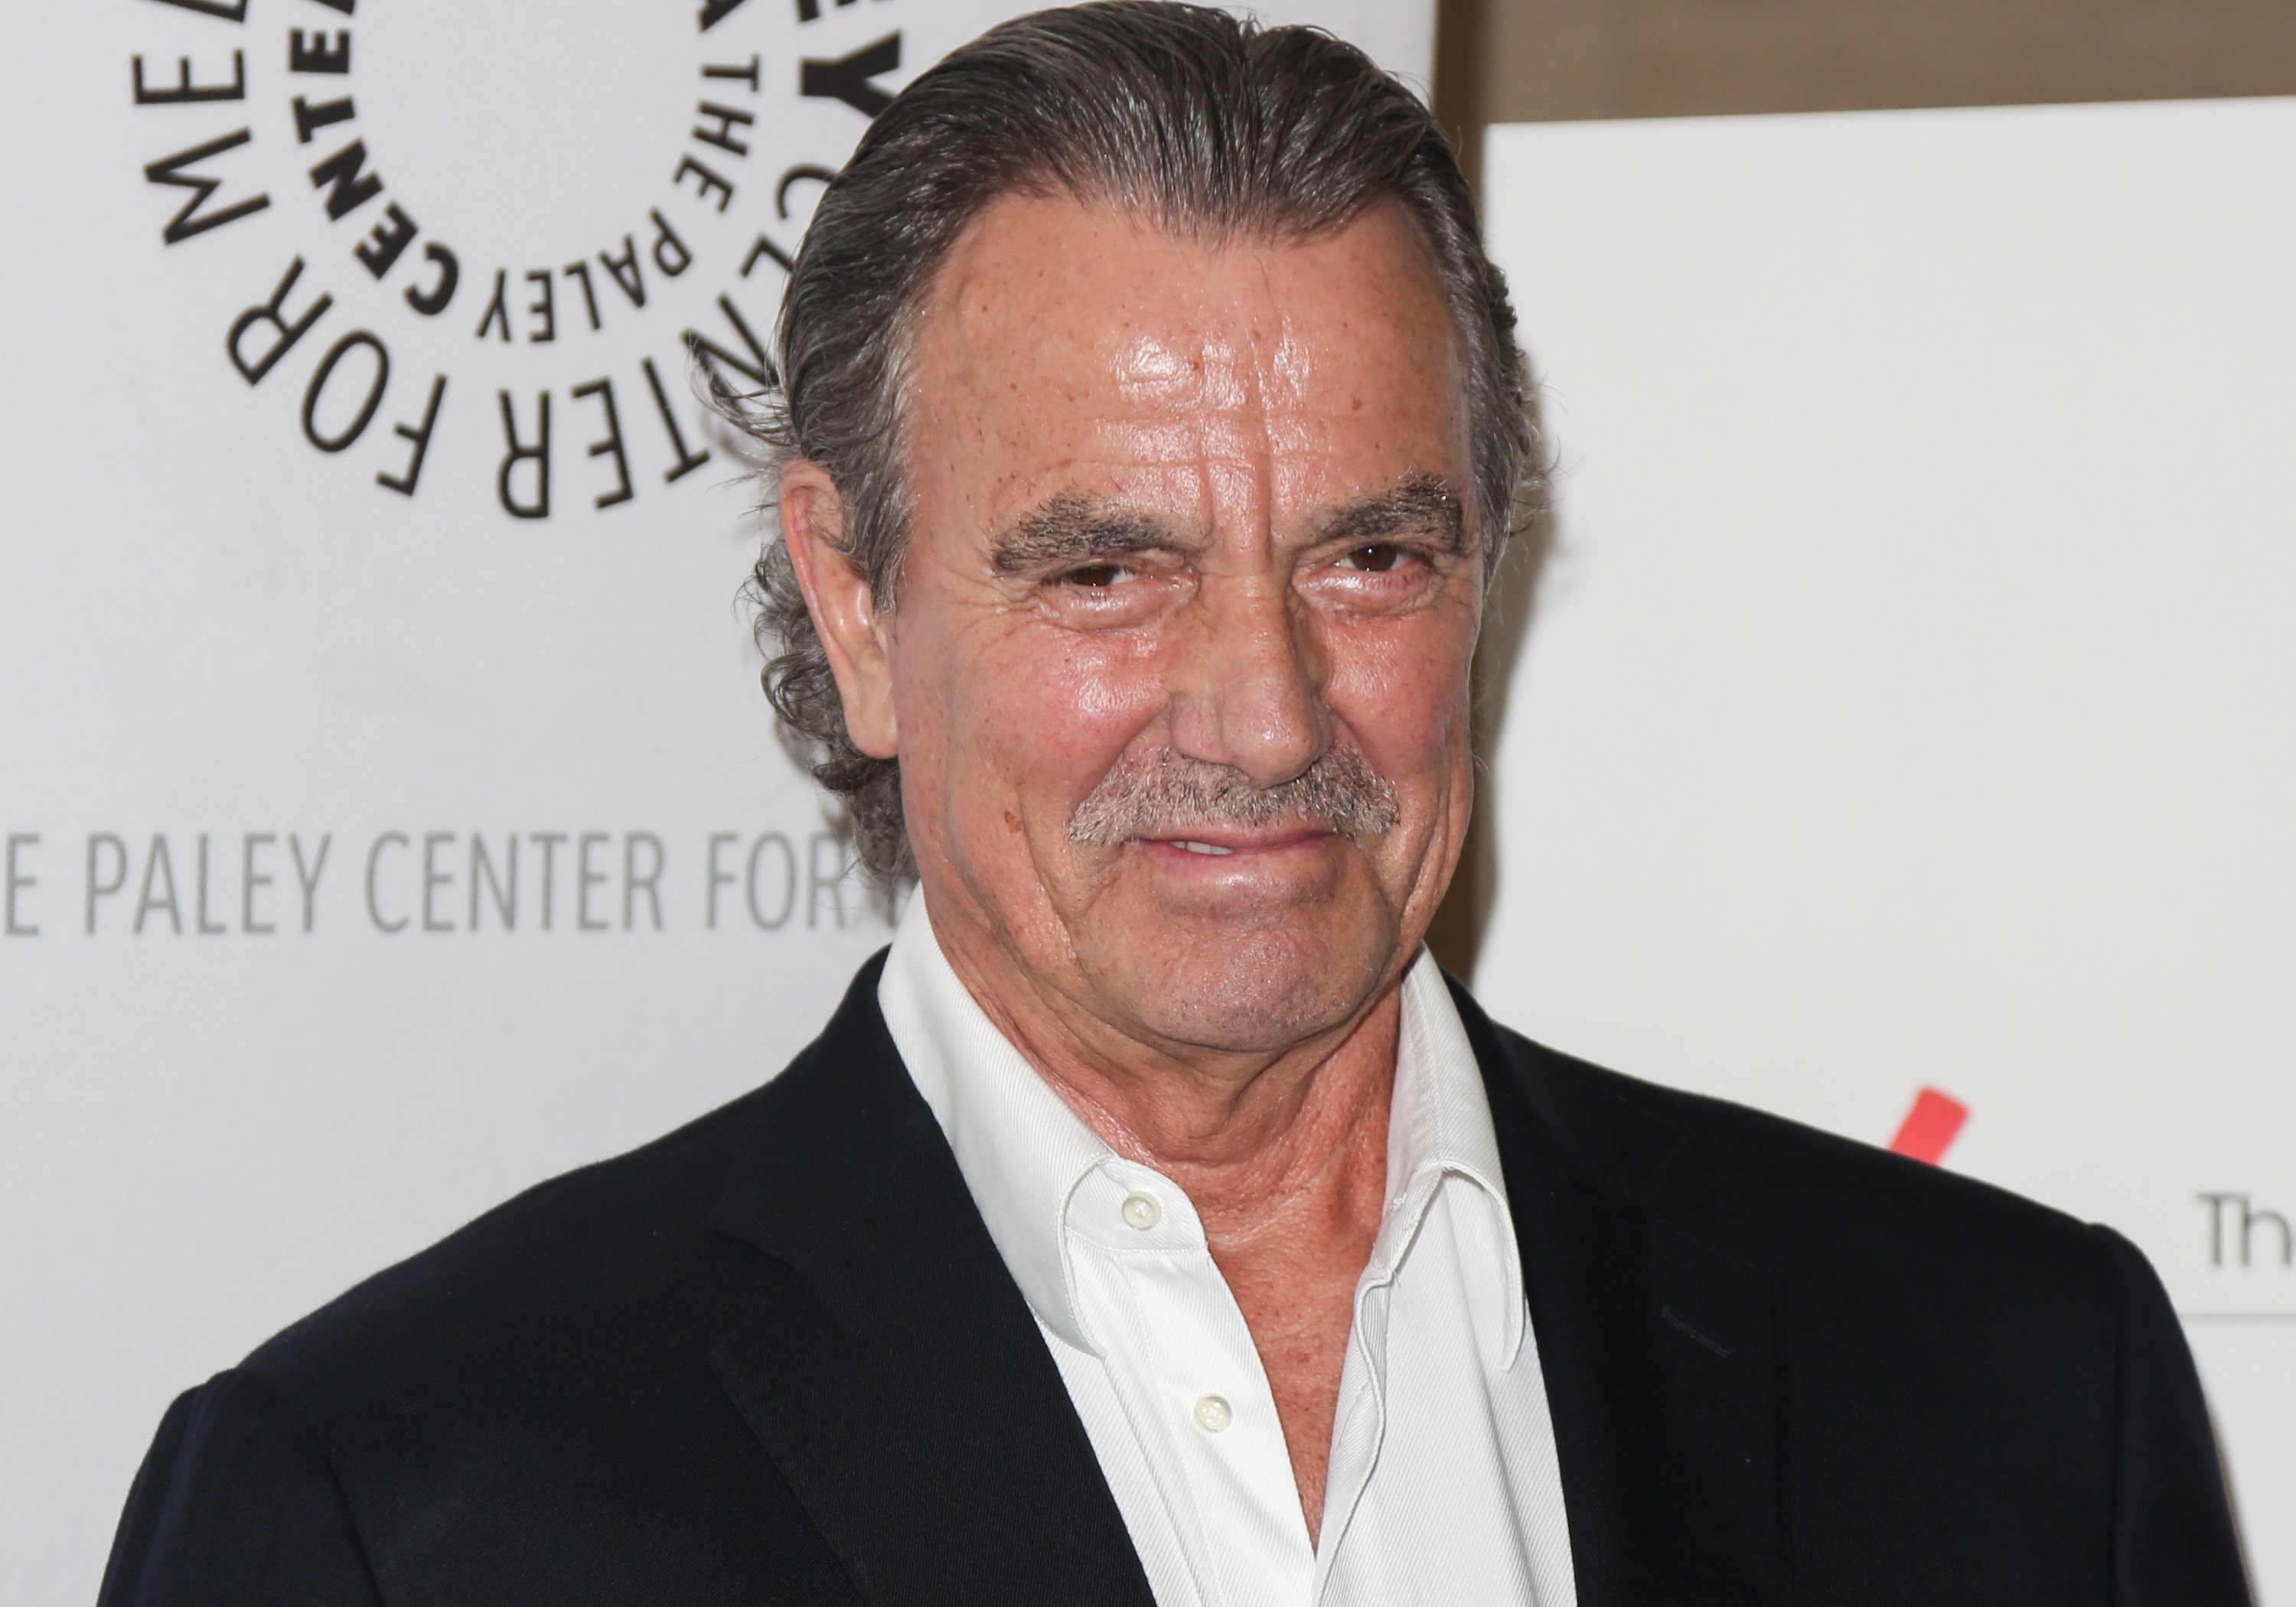 'The Young and the Restless' star Eric Braeden tweets his displeasure over Nathan's Hot Dog Eating Contest.